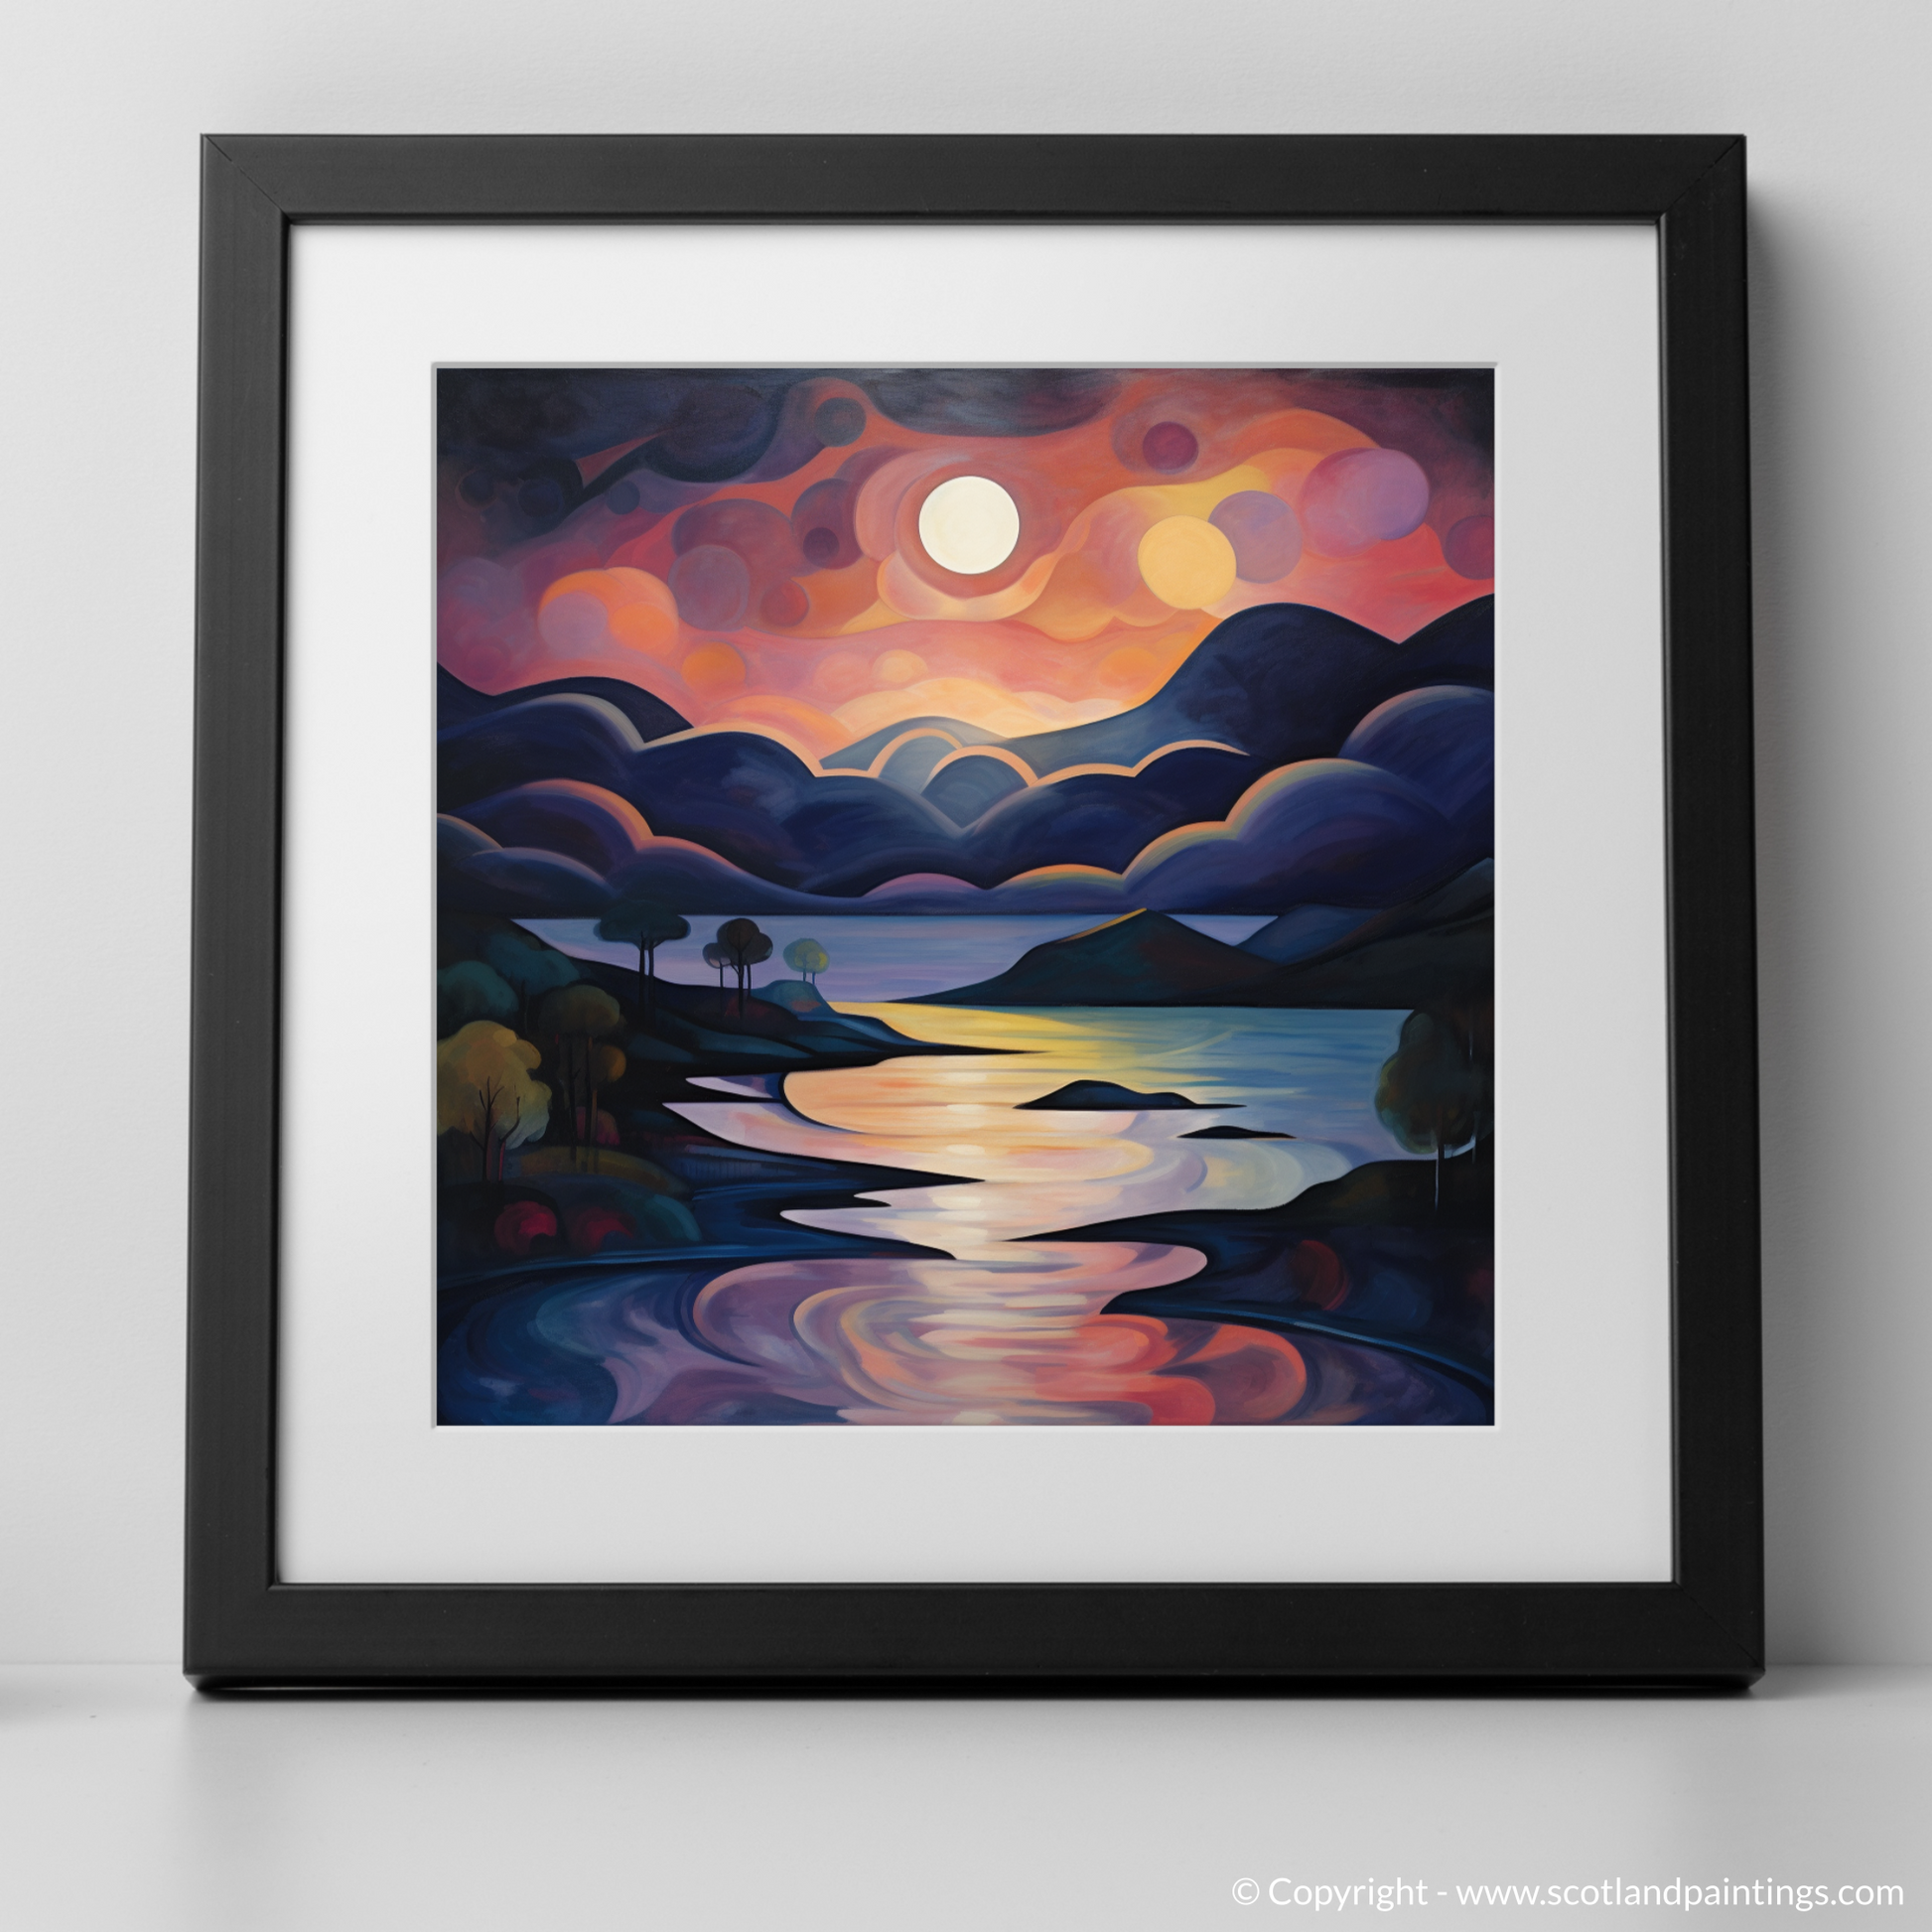 Art Print of Twilight reflections on Loch Lomond with a black frame